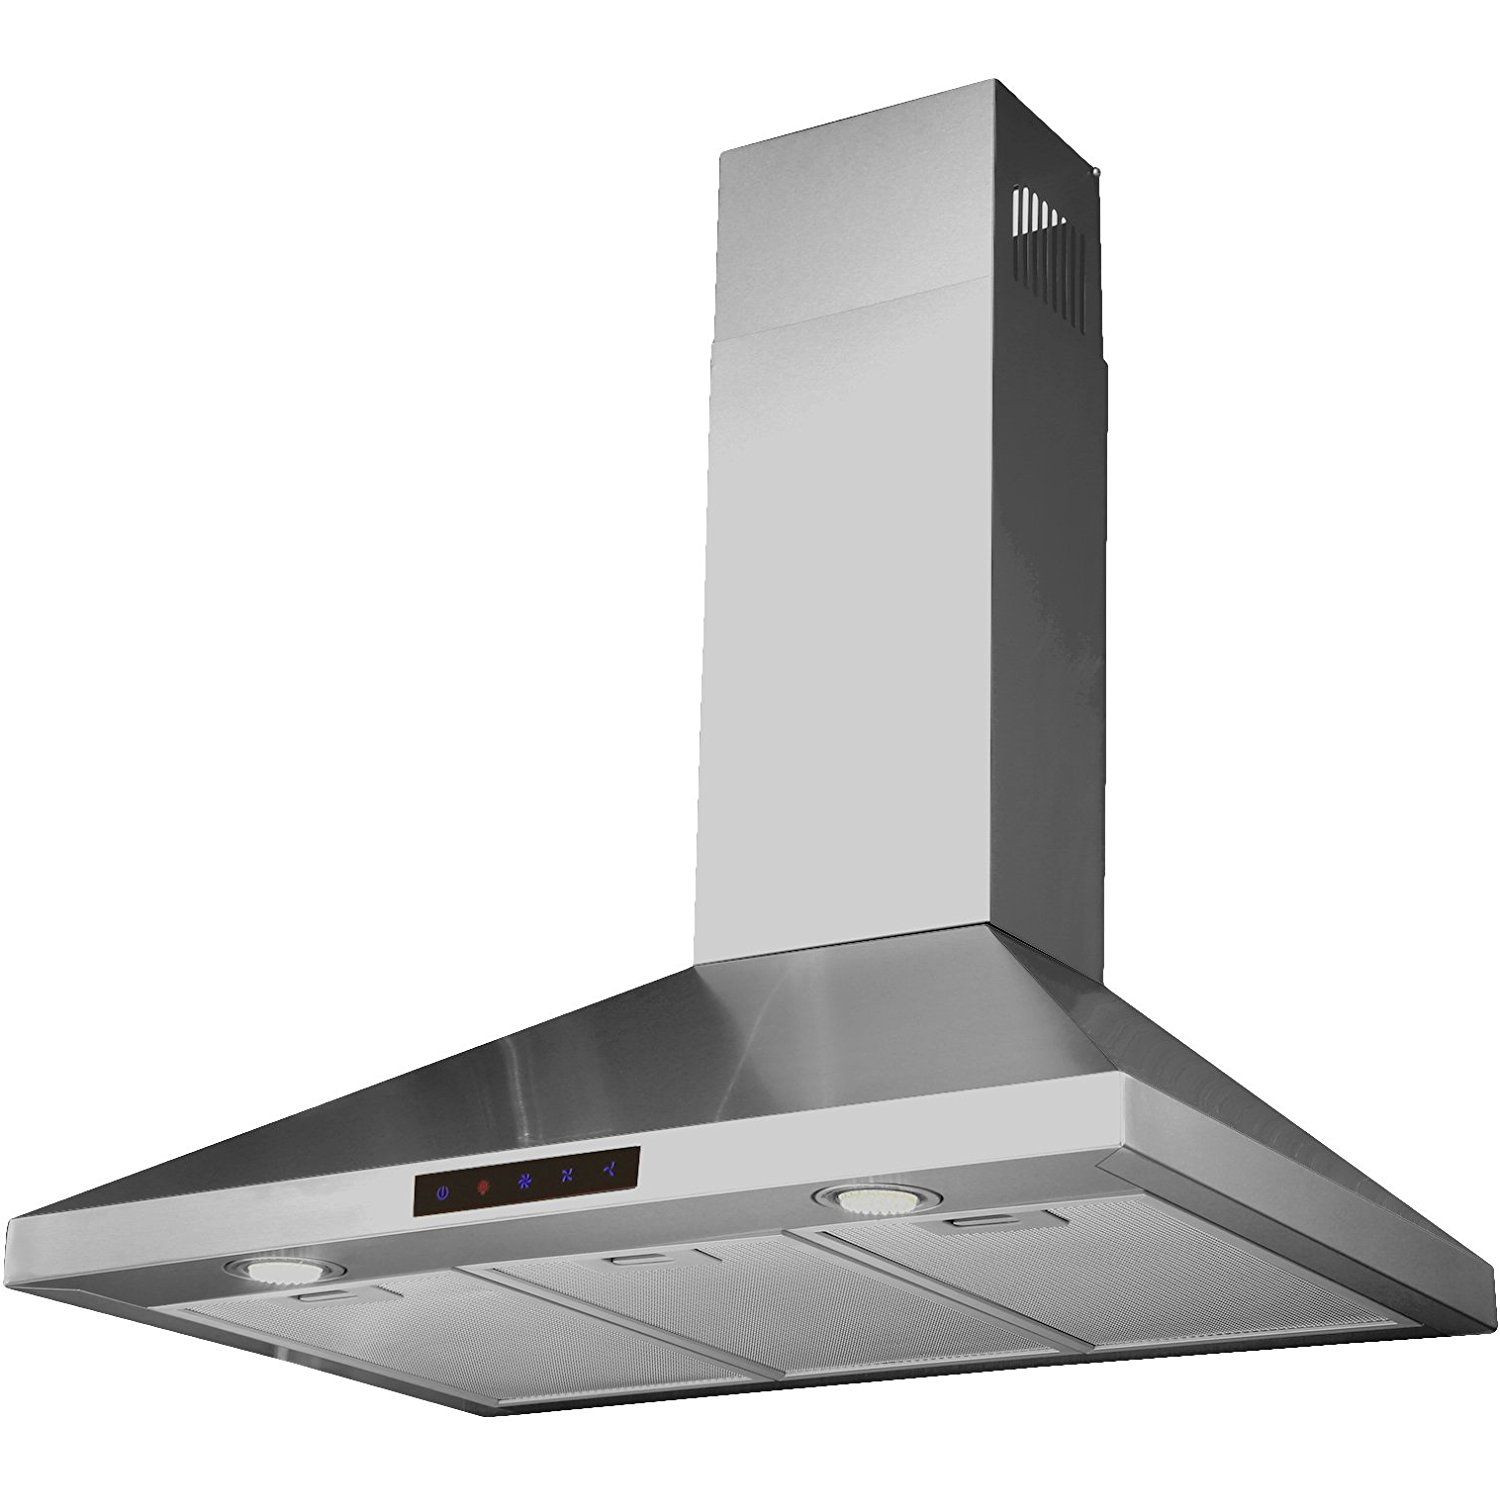 Ventless Bathroom Exhaust Fans
 Kitchen Bath Collection Stl90 Led Stainless Steel Wall Mounted